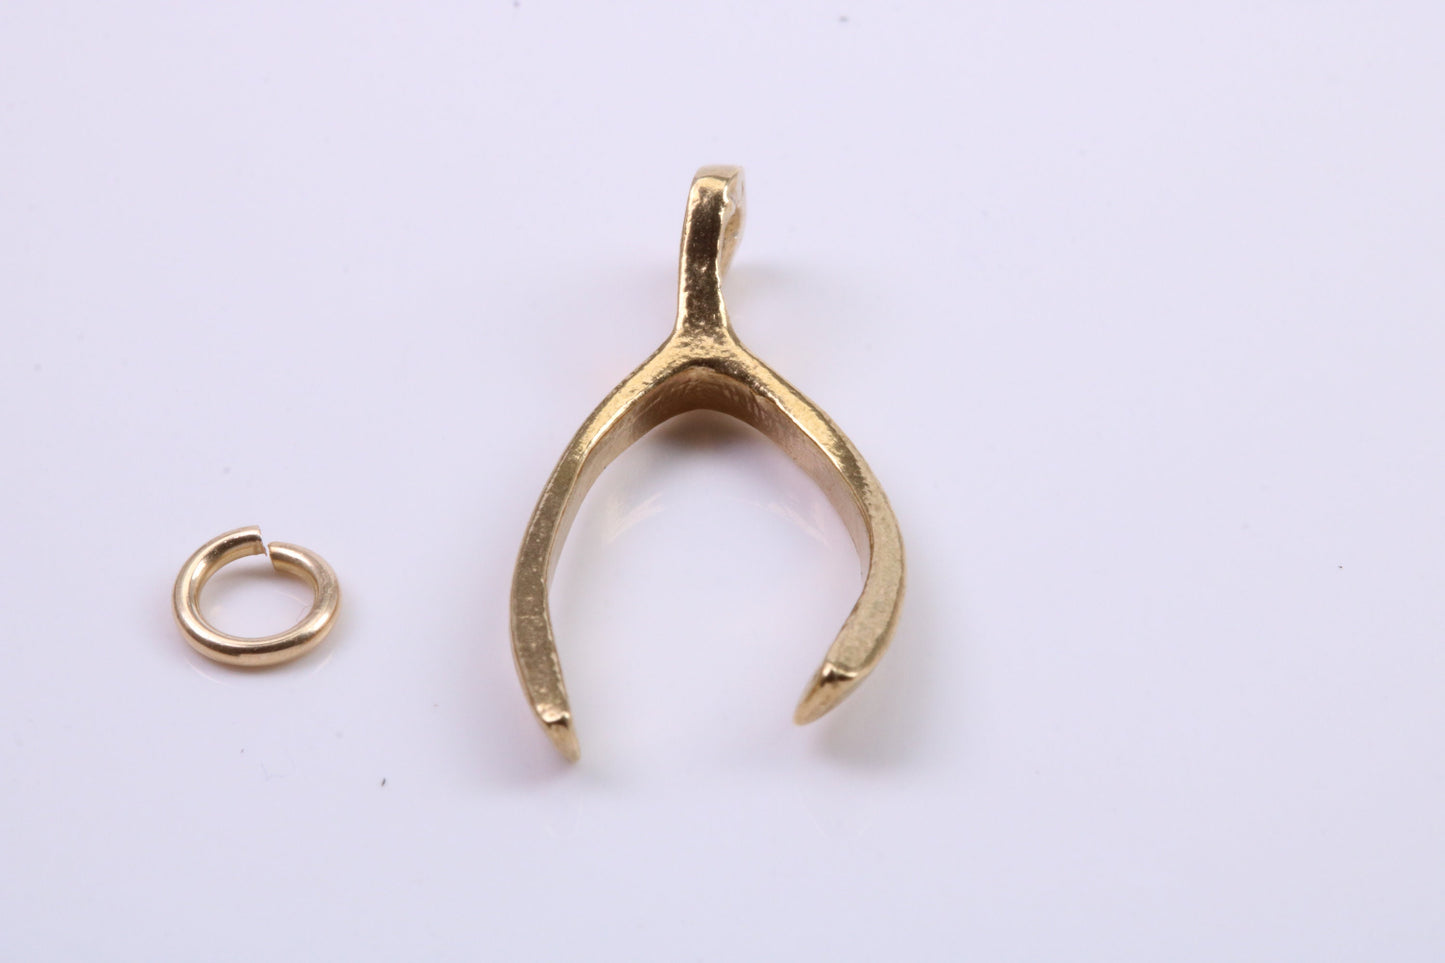 Wish Bone Charm, Traditional Charm, Made from Solid 9ct Yellow Gold, British Hallmarked, Complete with Attachment Link